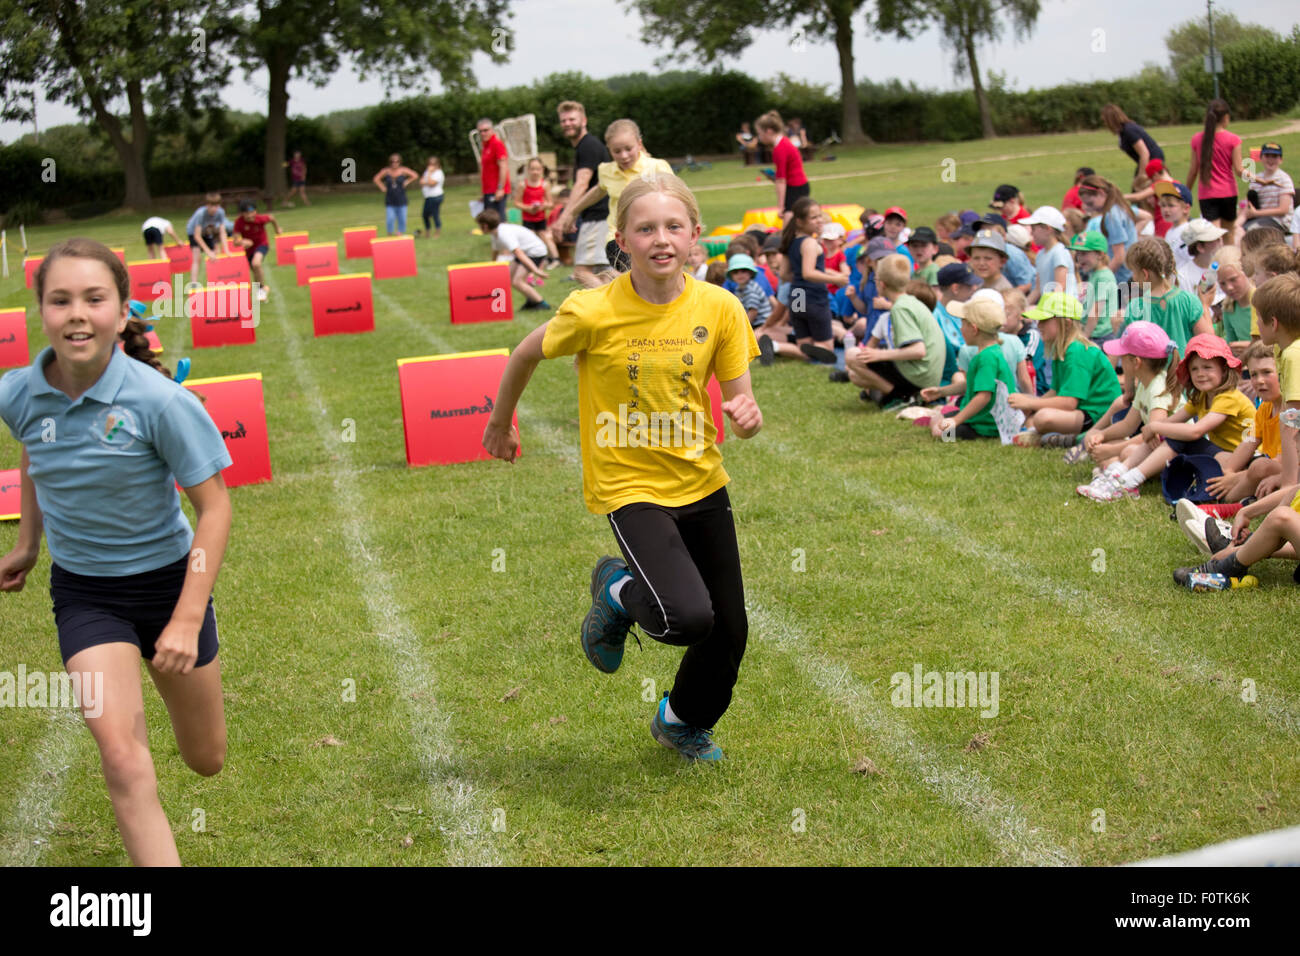 Girls competing in hurdles race with children watching School Sports Day Chipping Campden UK Stock Photo